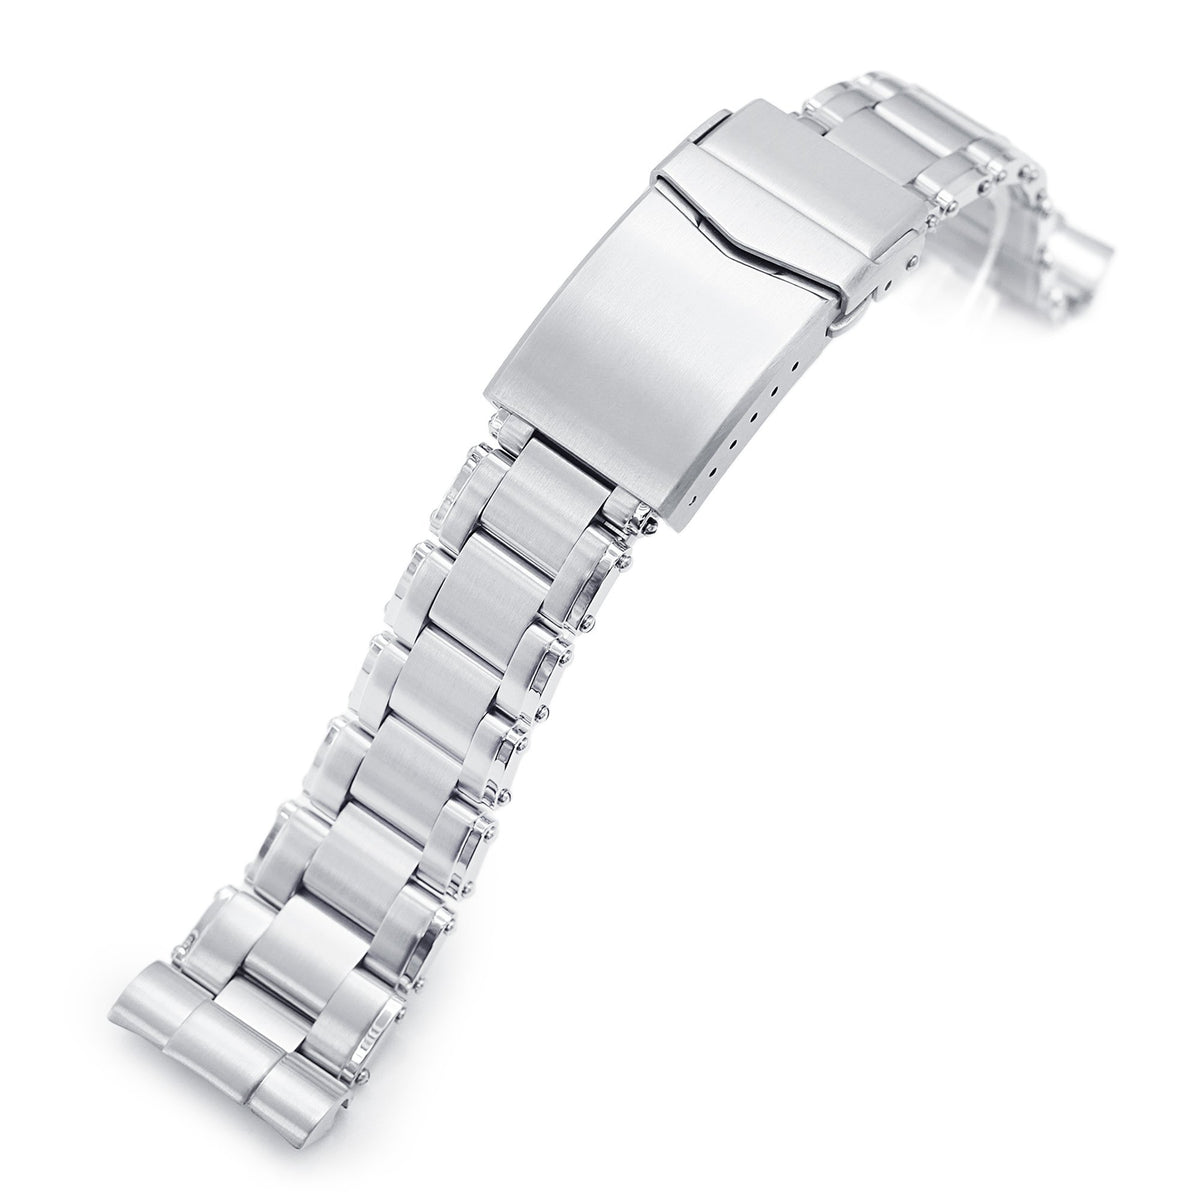 22mm Metabind 316L Stainless Steel Watch Bracelet for Seiko new Turtles SRP777 Brushed V-Clasp Strapcode Watch Bands